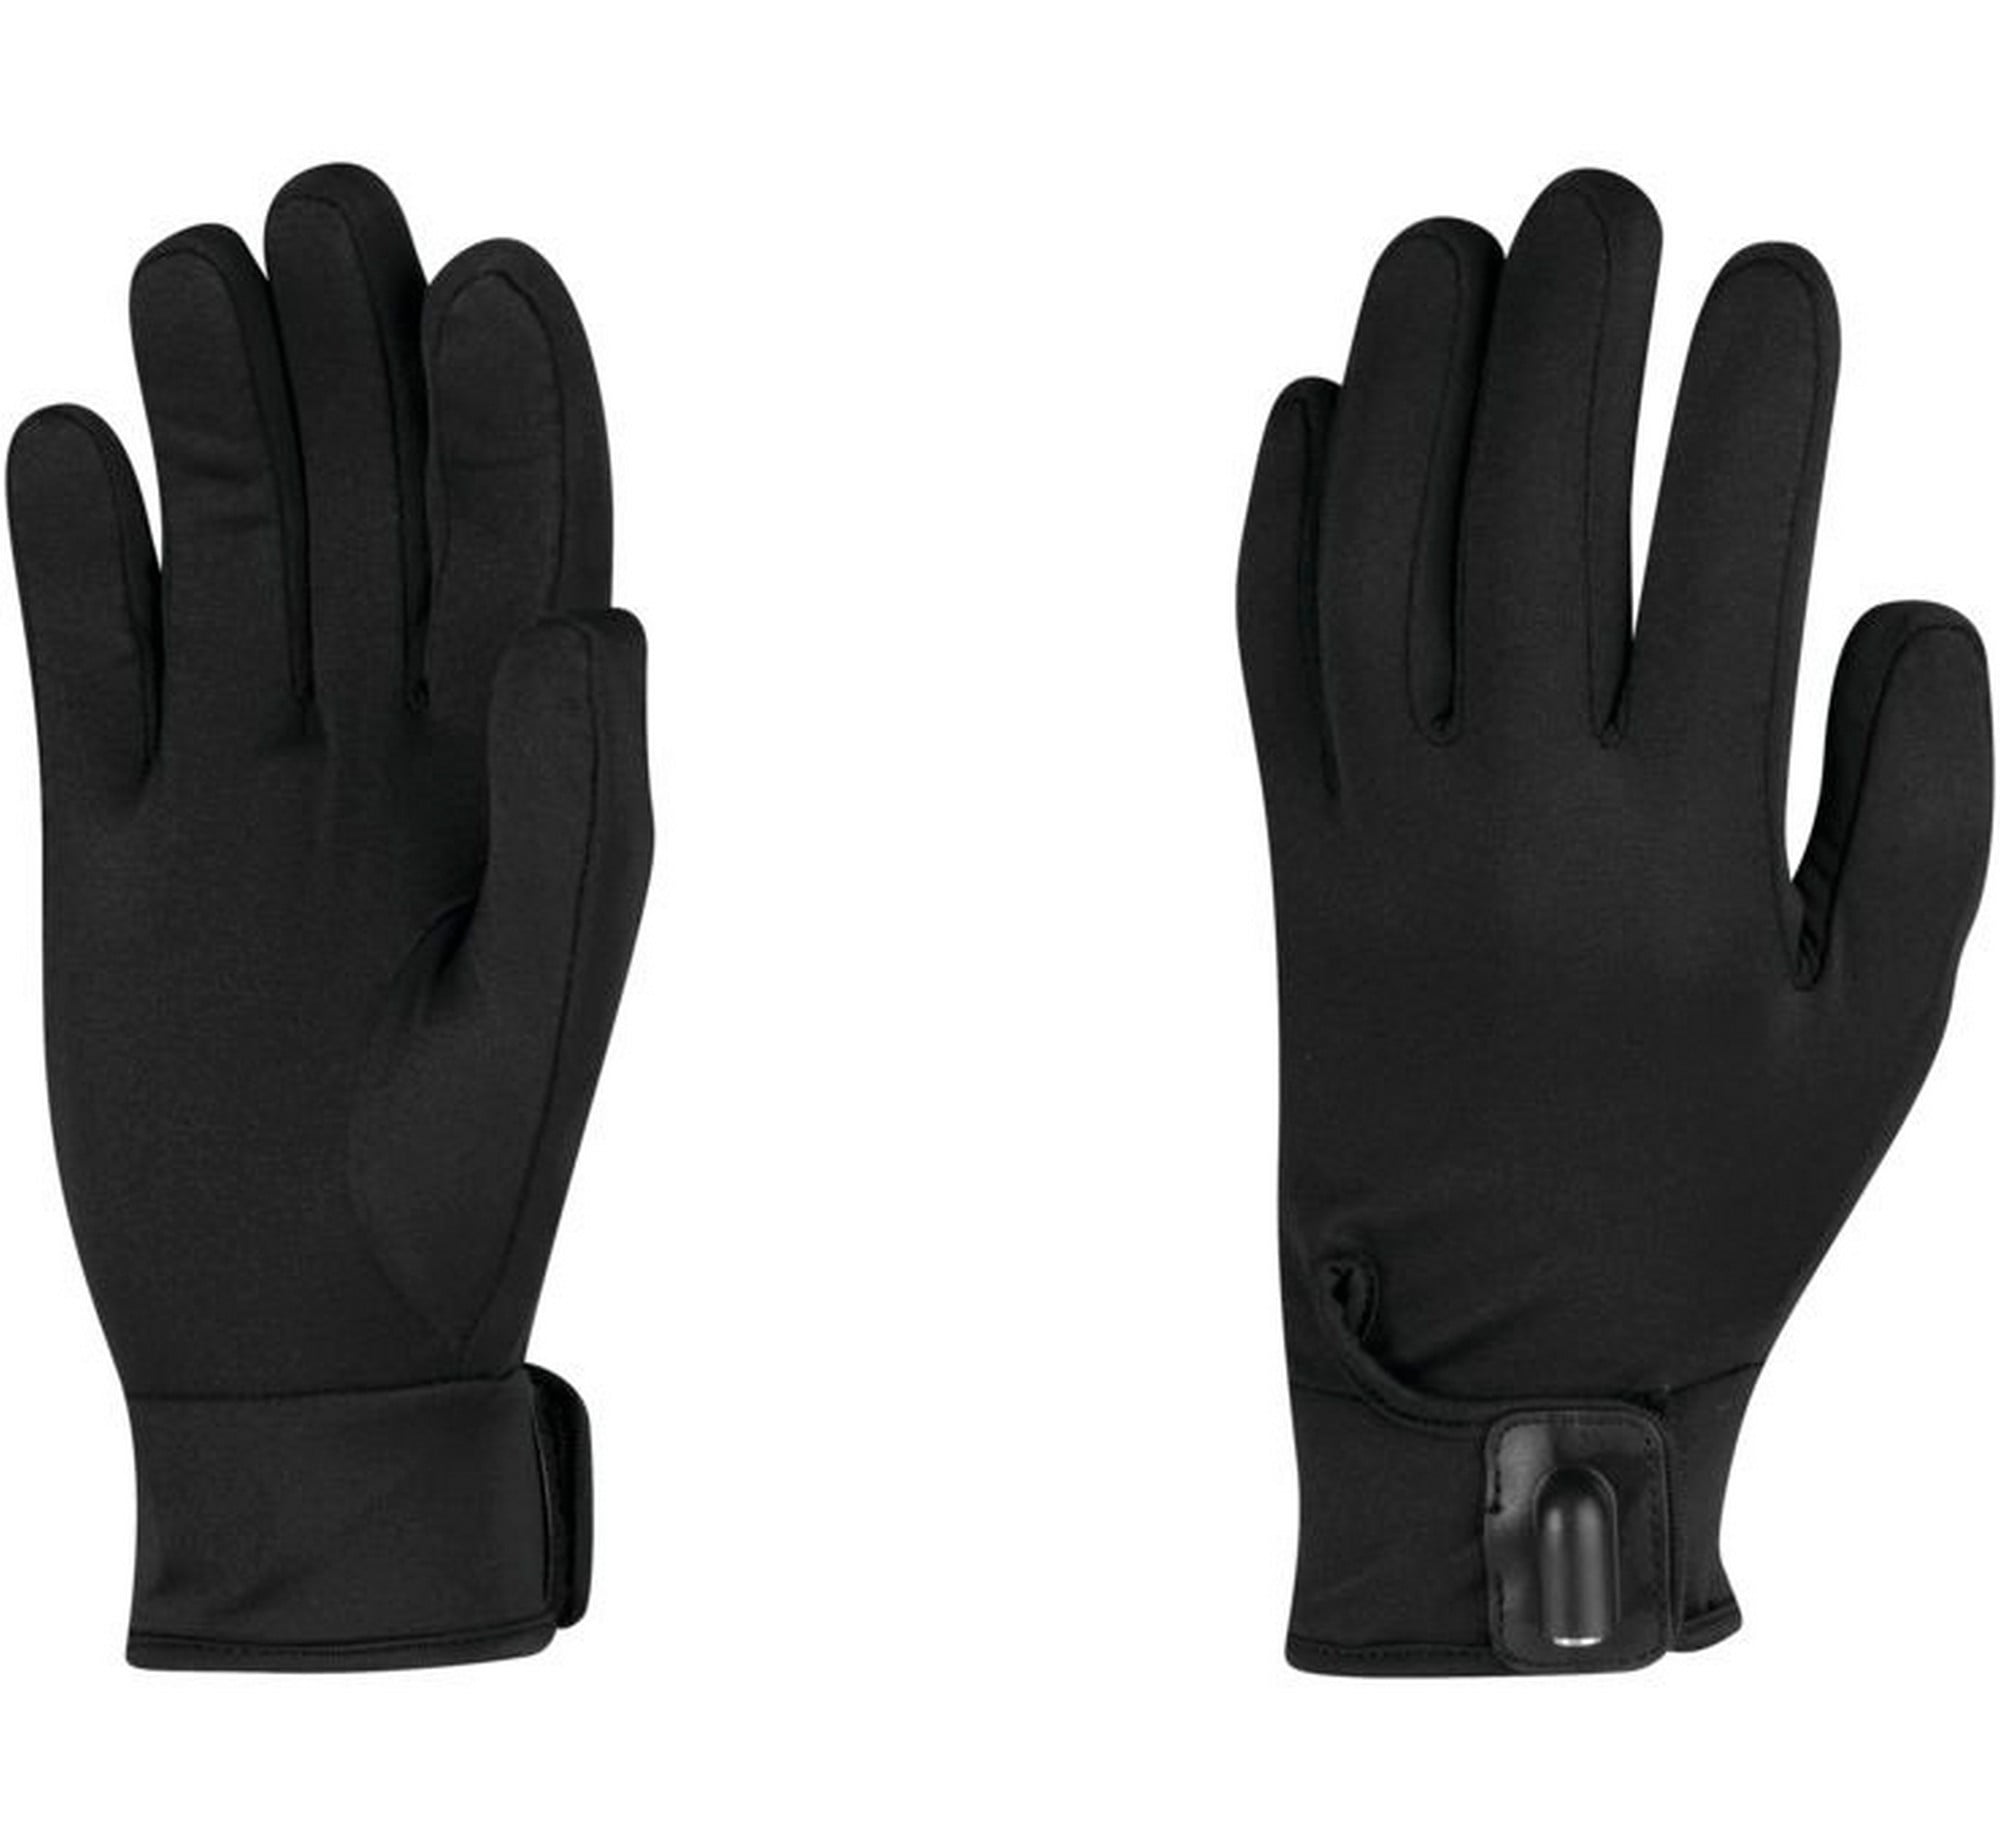 Small/Medium/Black Firstgear Warm and Safe Heated Glove Liners 